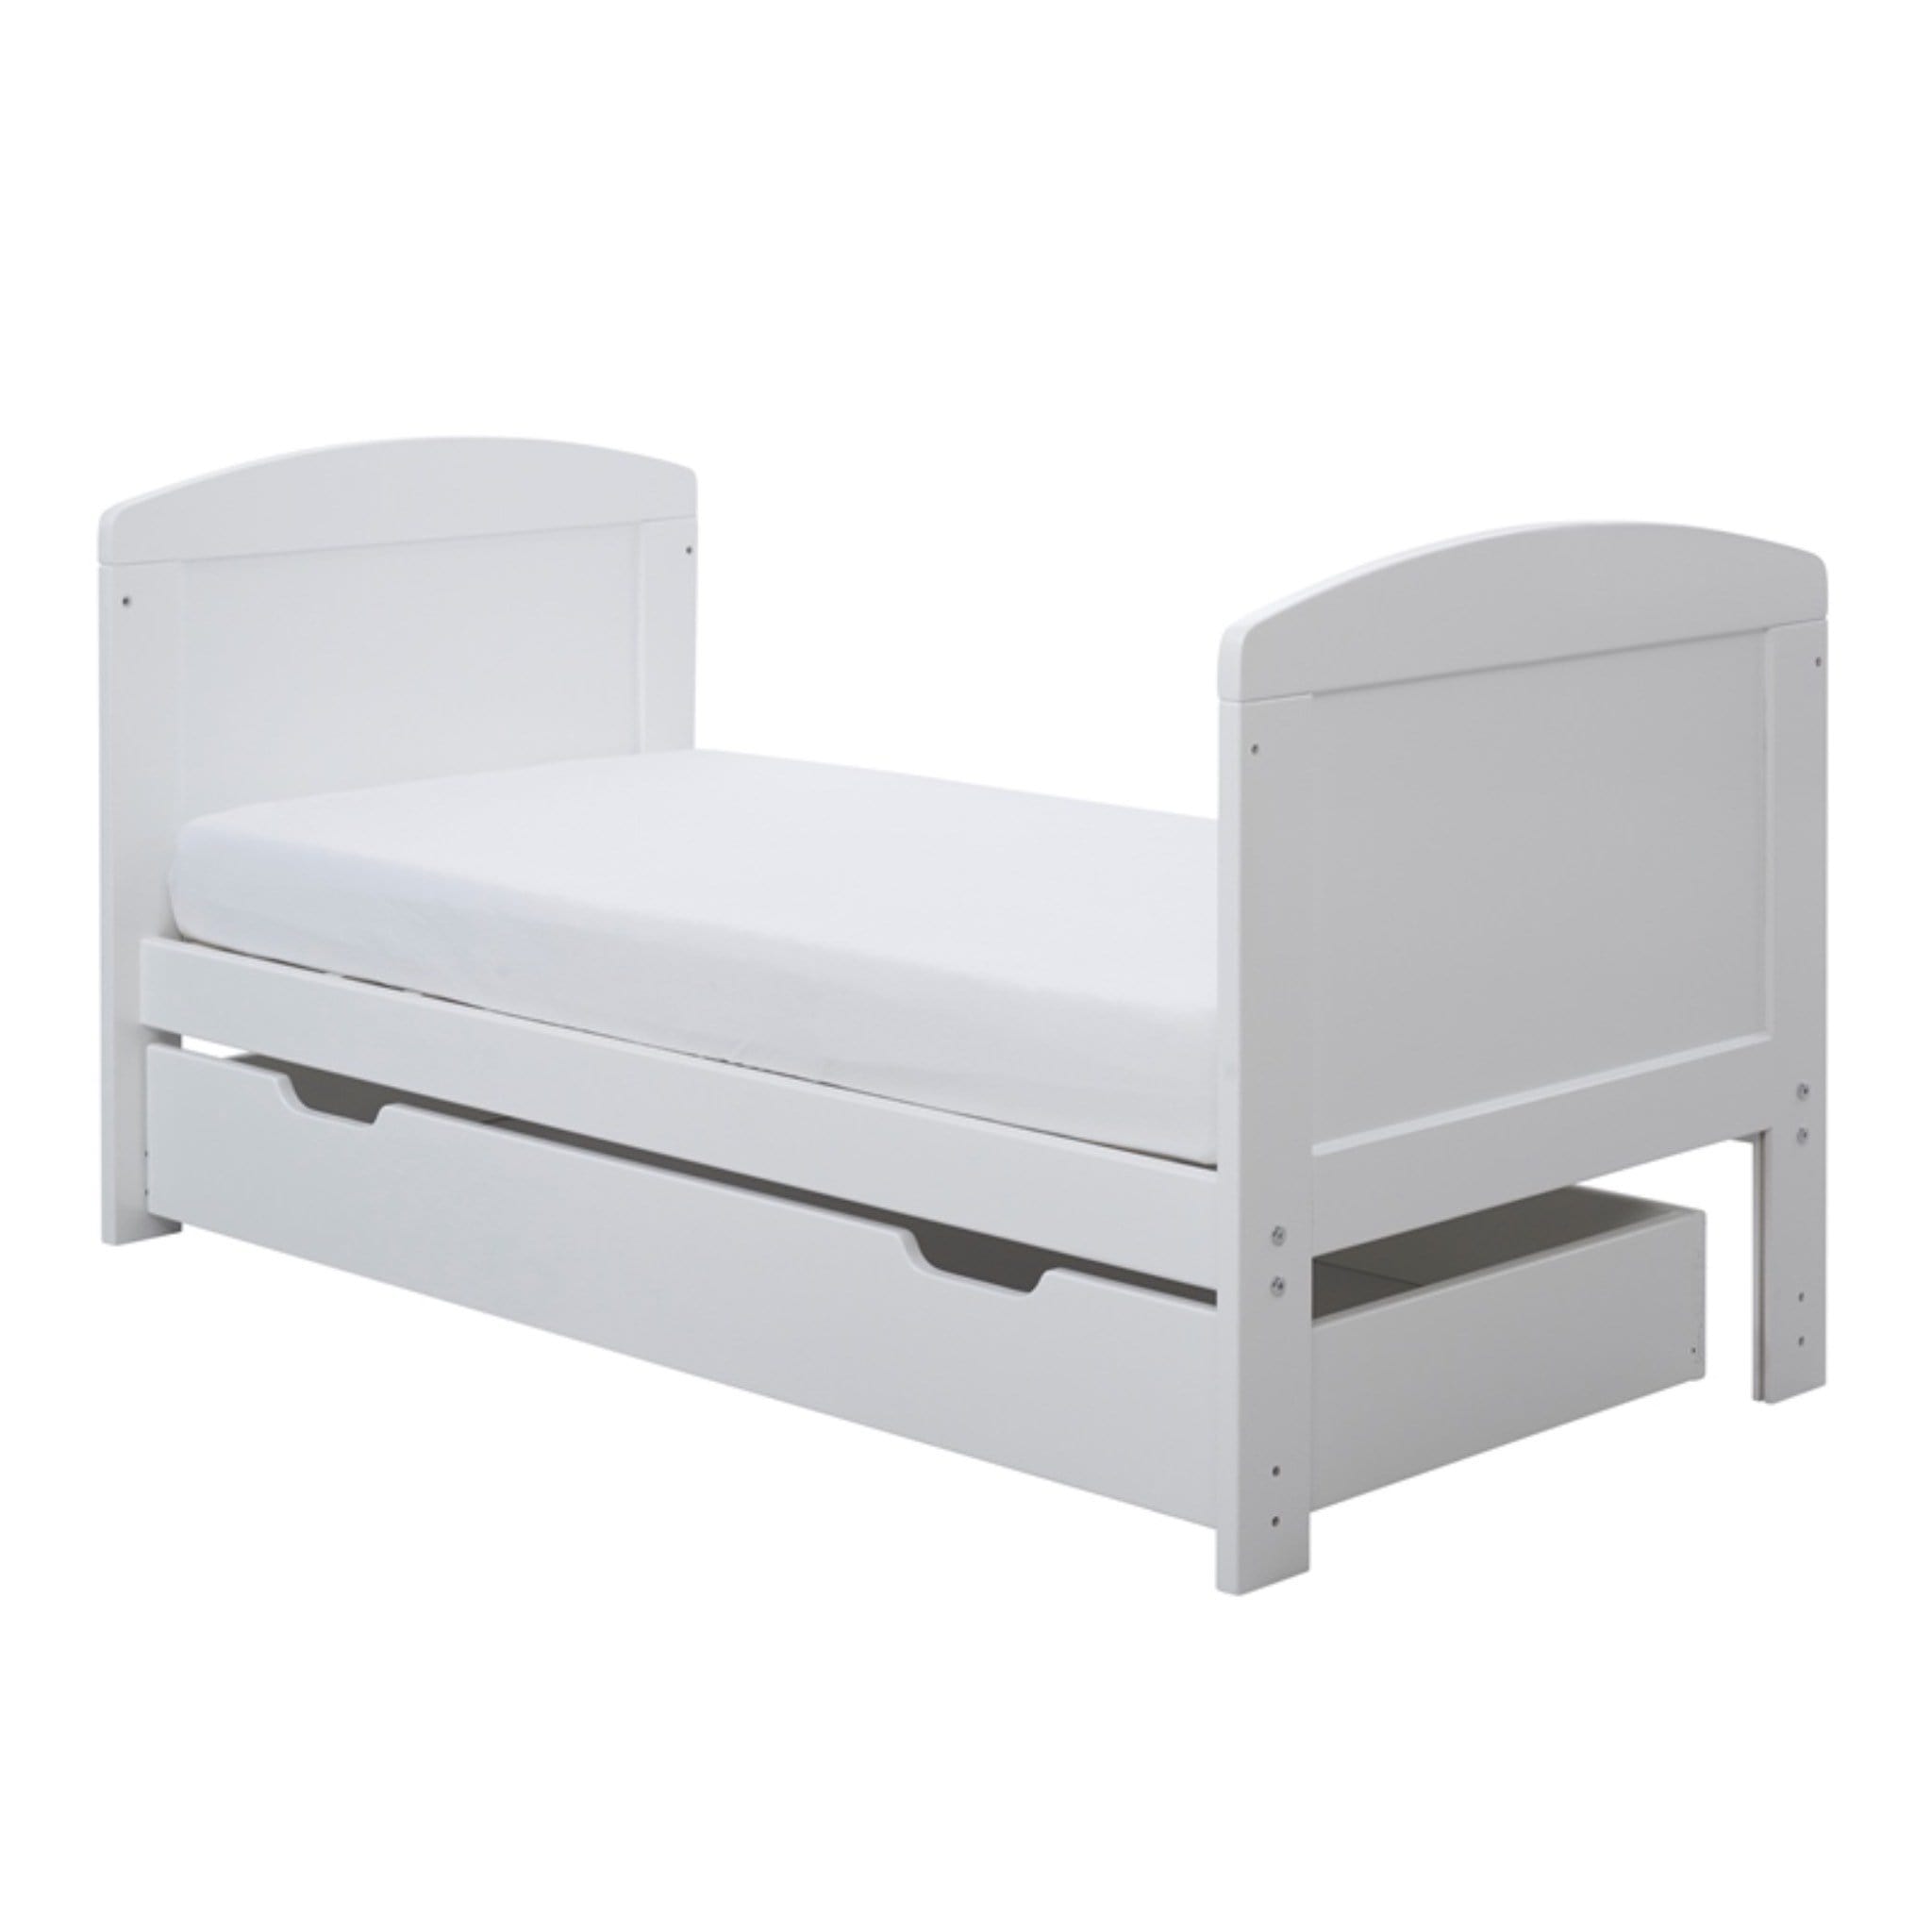 Ickle Bubba Cot Beds Ickle Bubba Coleby Mini Cot Bed & Under Drawer White